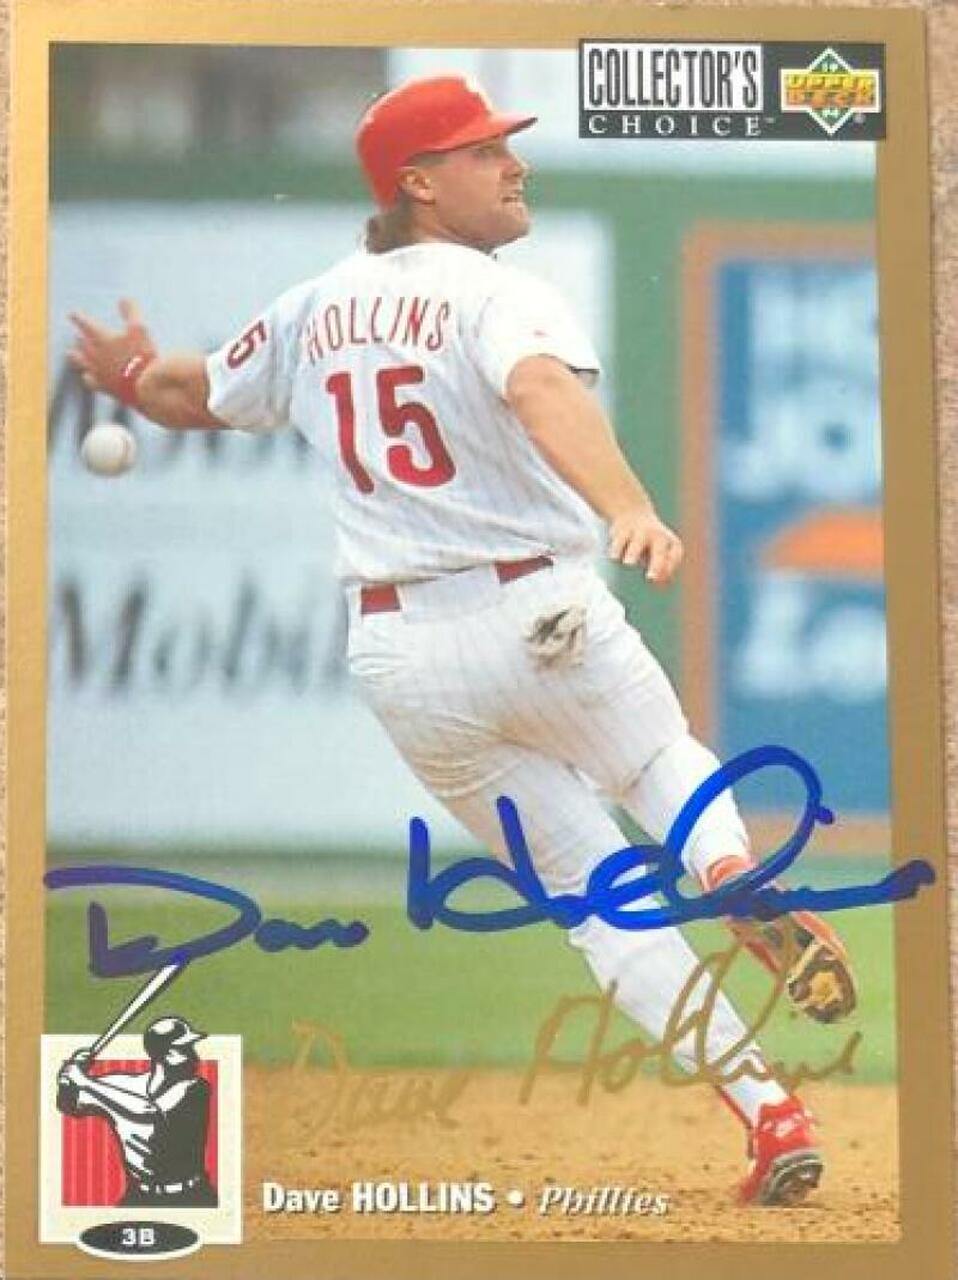 Dave Hollins Signed 1994 Collector's Choice Gold Signature Baseball Card - Philadelphia Phillies - PastPros